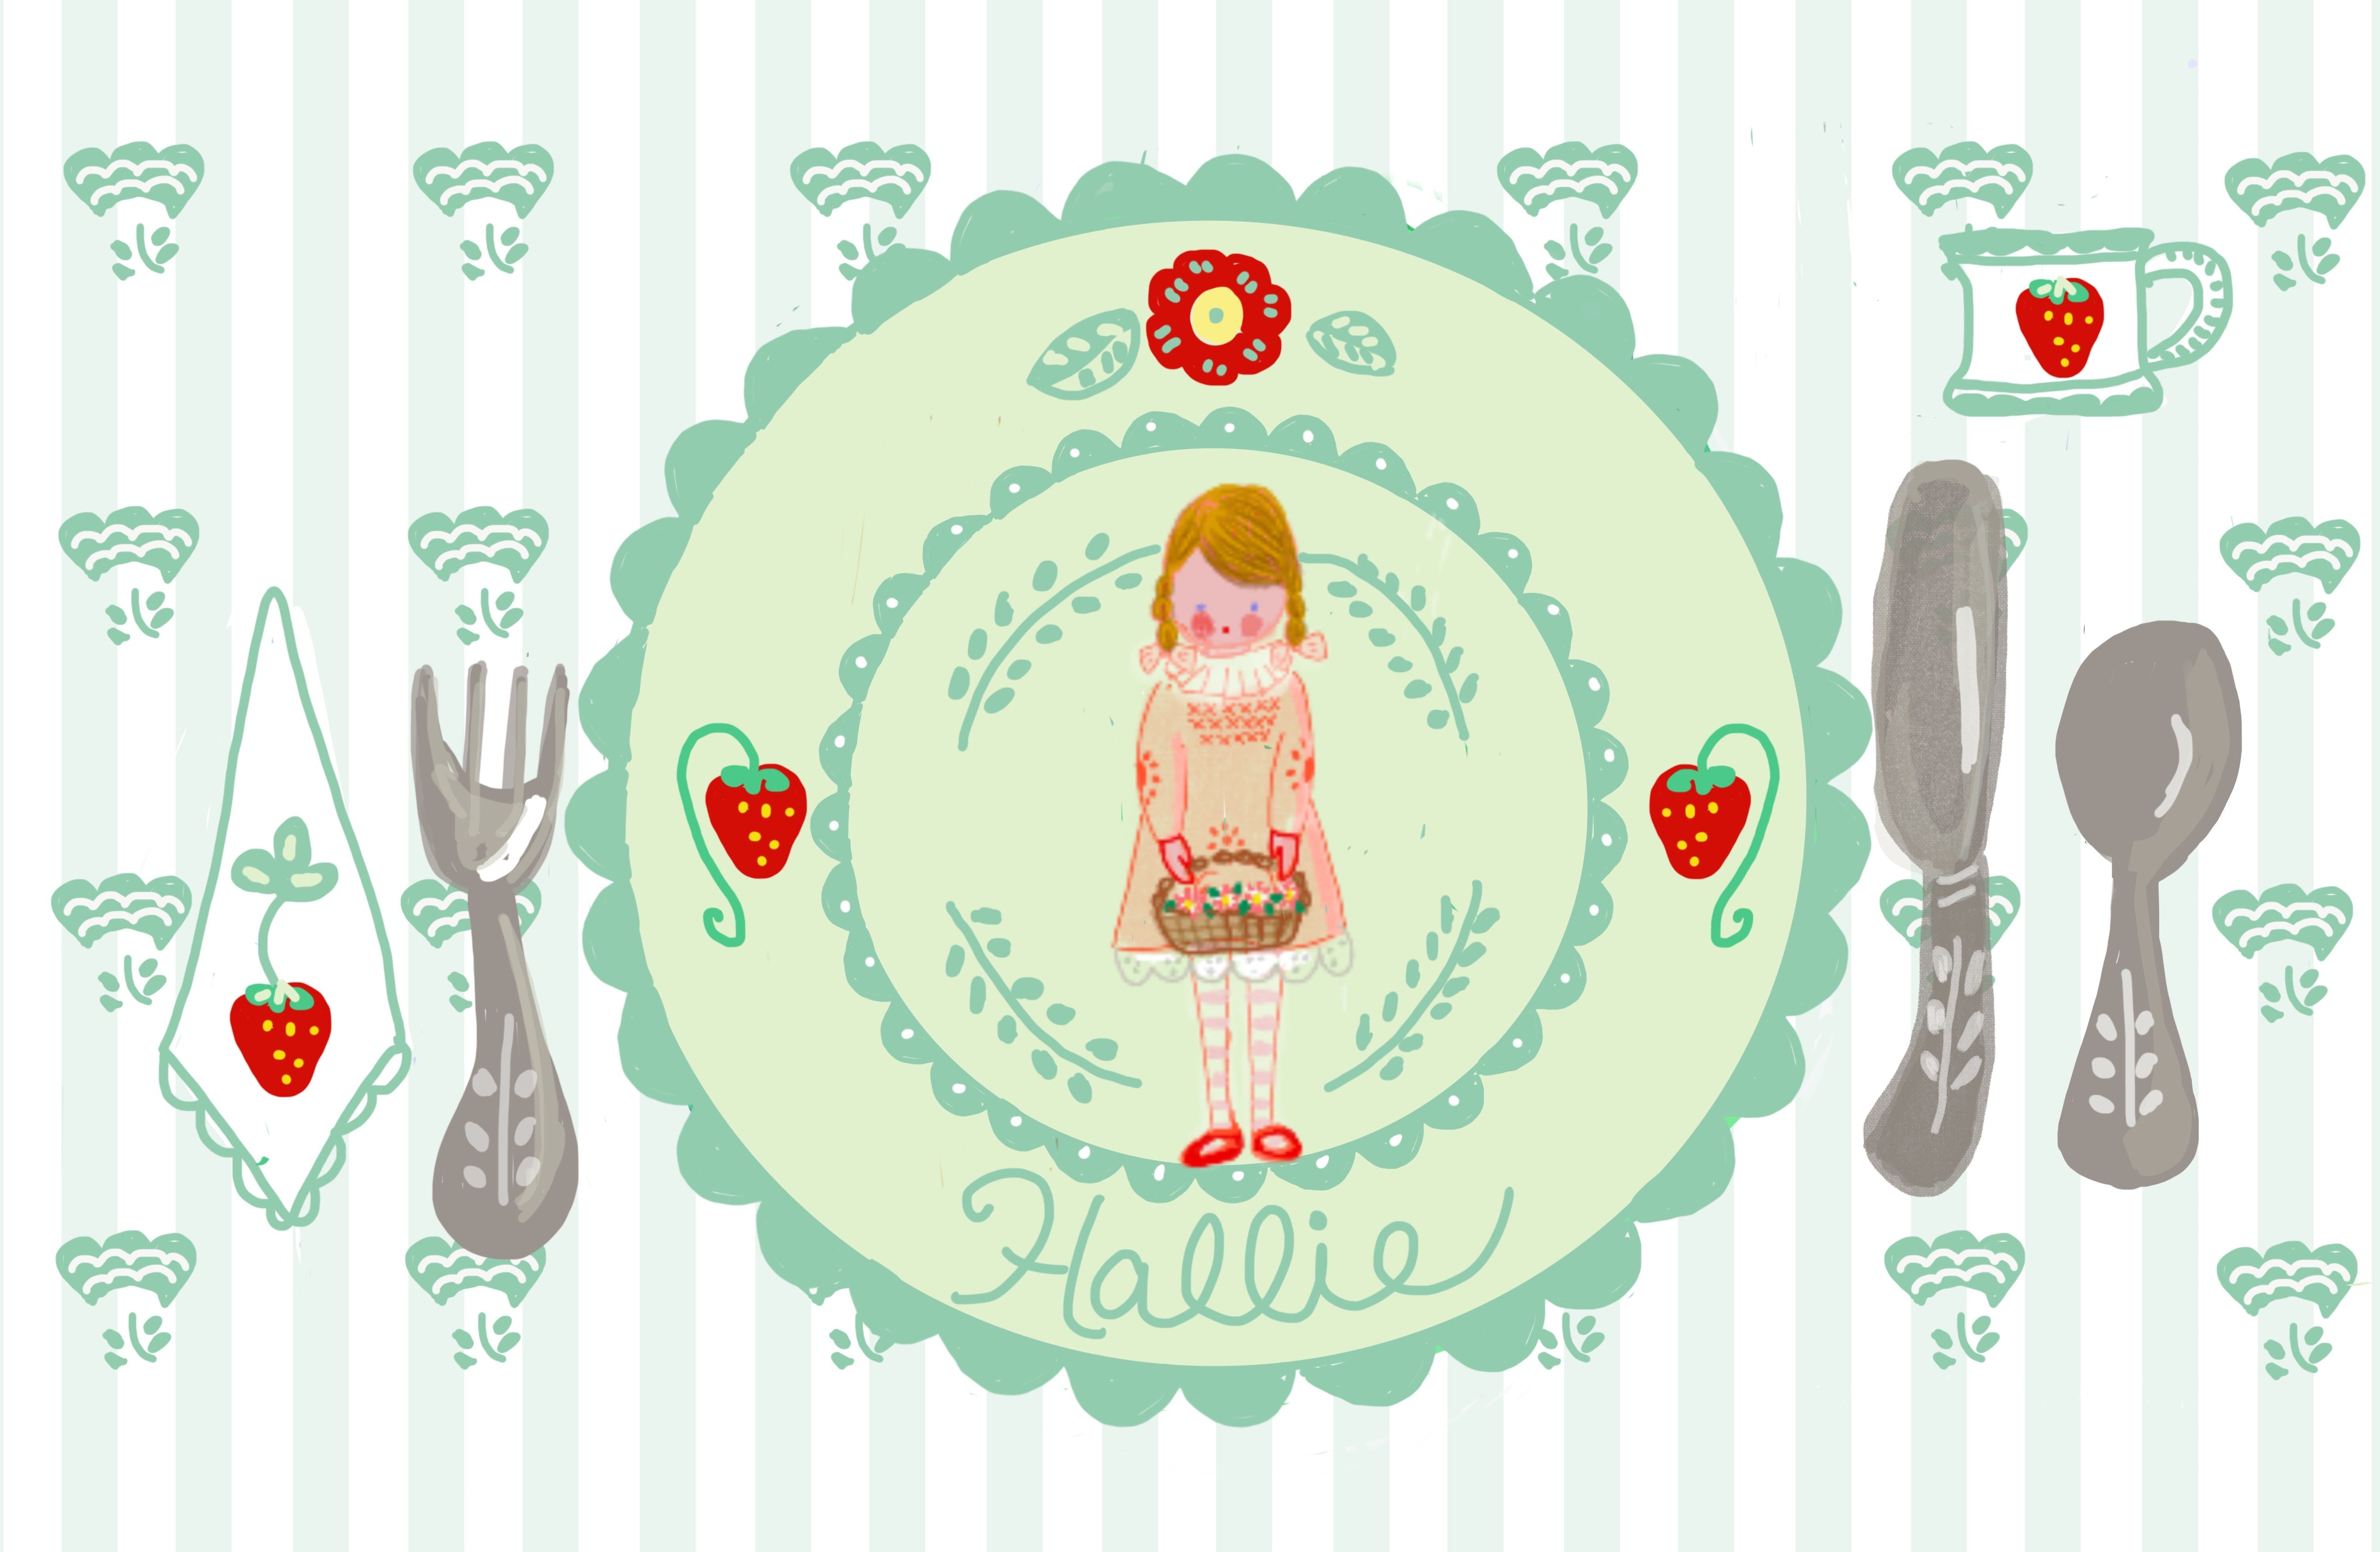 Girl with Flower Basket Placemat (personalized) - Premium Placemat from Tricia Lowenfield Shop 